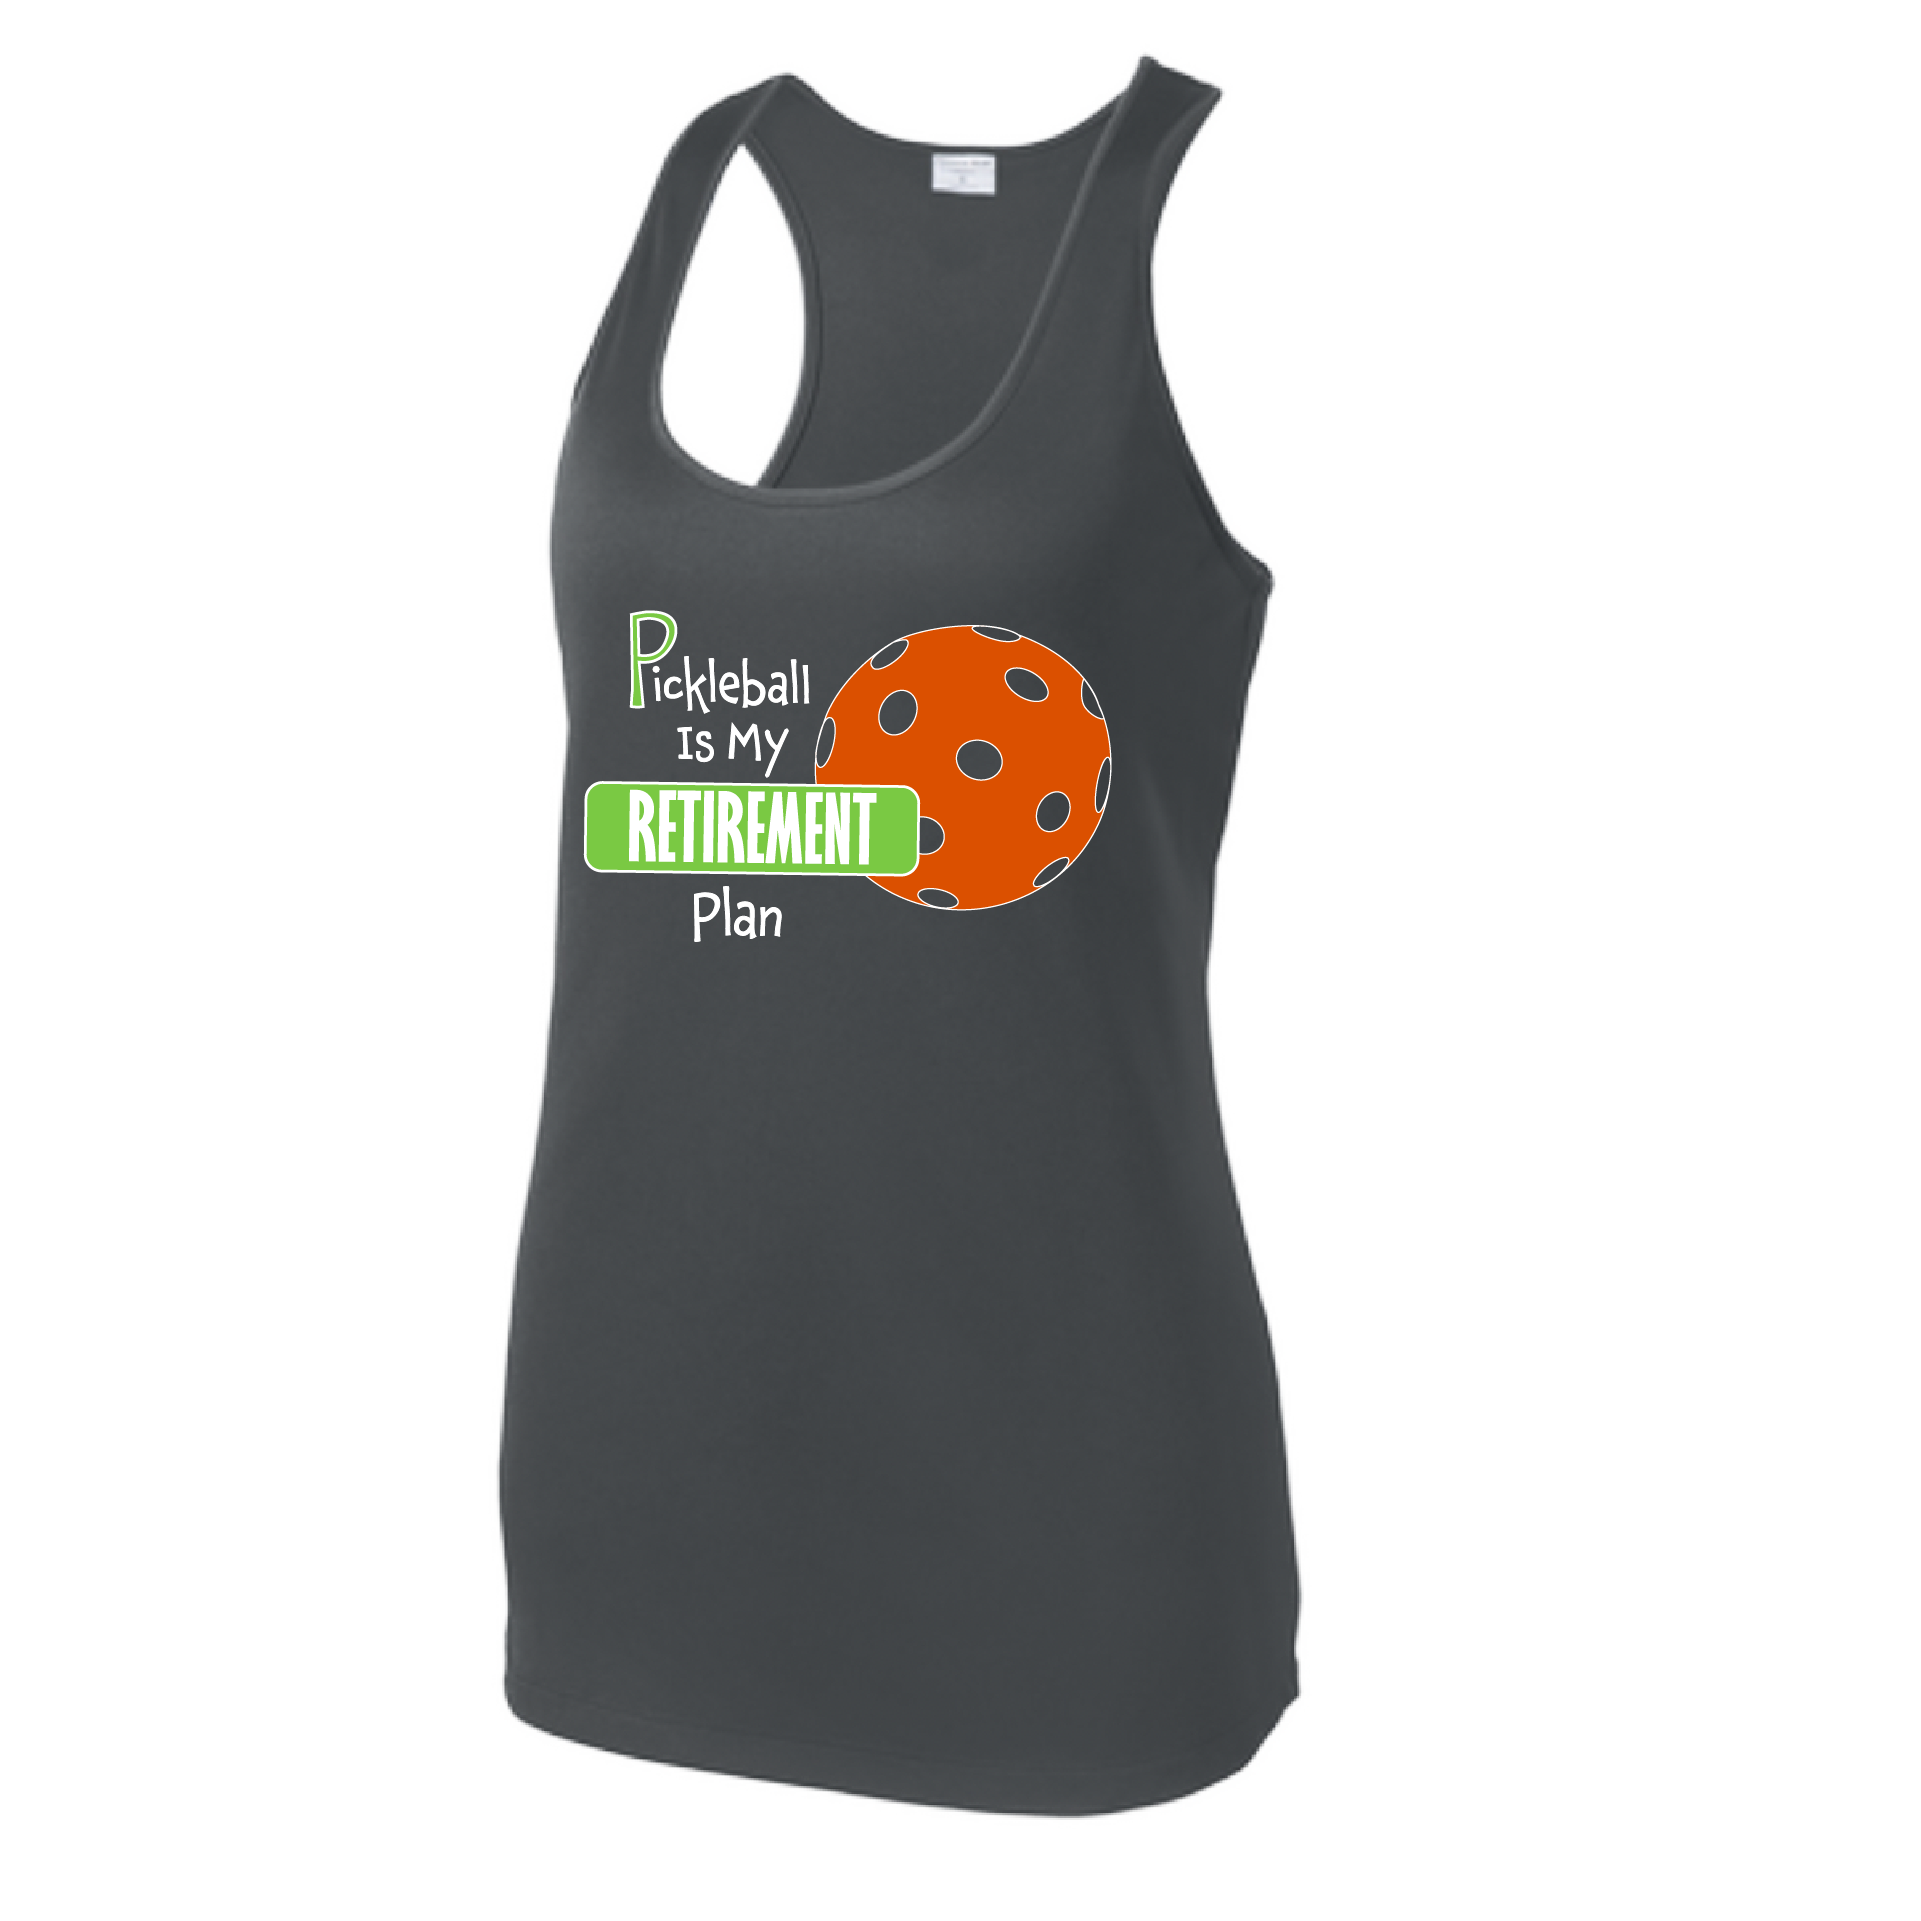 Pickleball Design: Pickleball is my Retirement plan  Women's Style: Racerback Tank  Turn up the volume in this Women's shirt with its perfect mix of softness and attitude. Material is ultra-comfortable with moisture wicking properties and tri-blend softness. PosiCharge technology locks in color. Highly breathable and lightweight.